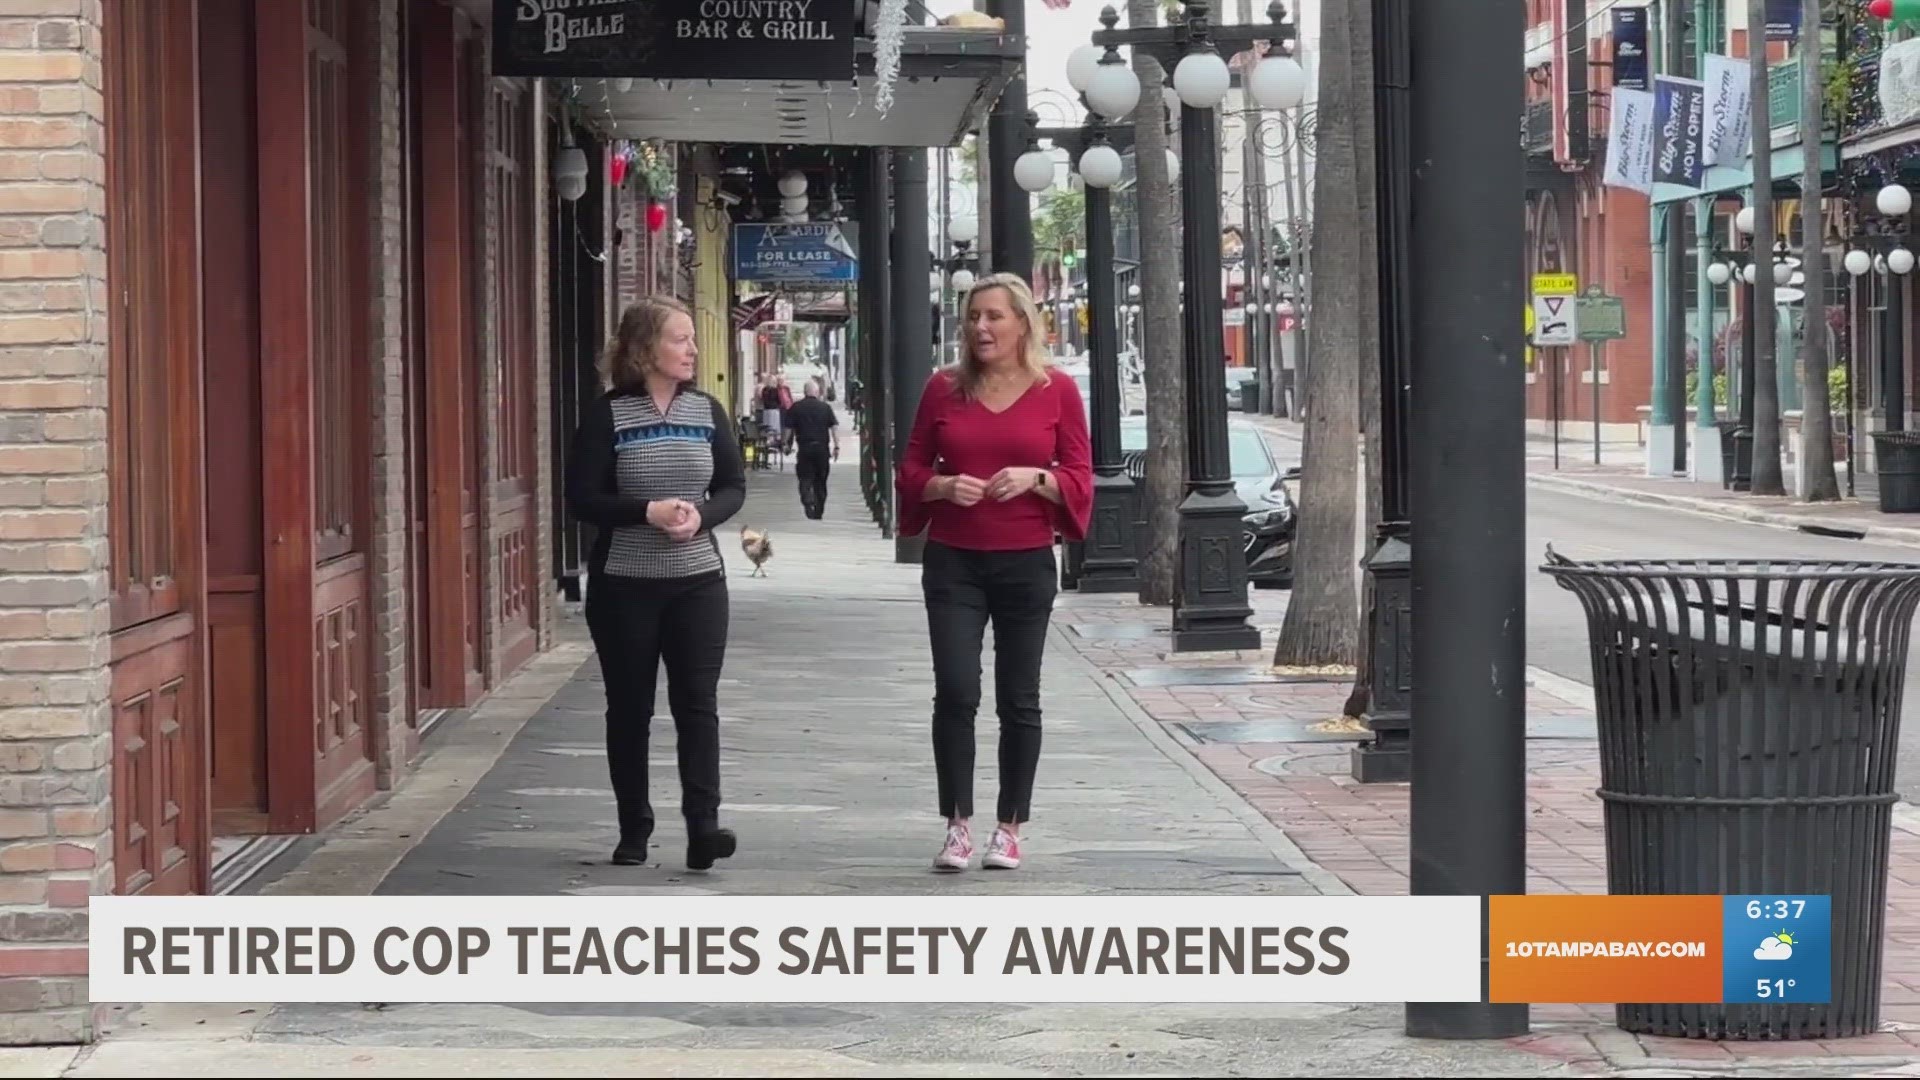 Gun crimes are on the rise in the area, including among teens. After the deadly shooting in Ybor City, a former officer shares her experiences and training.